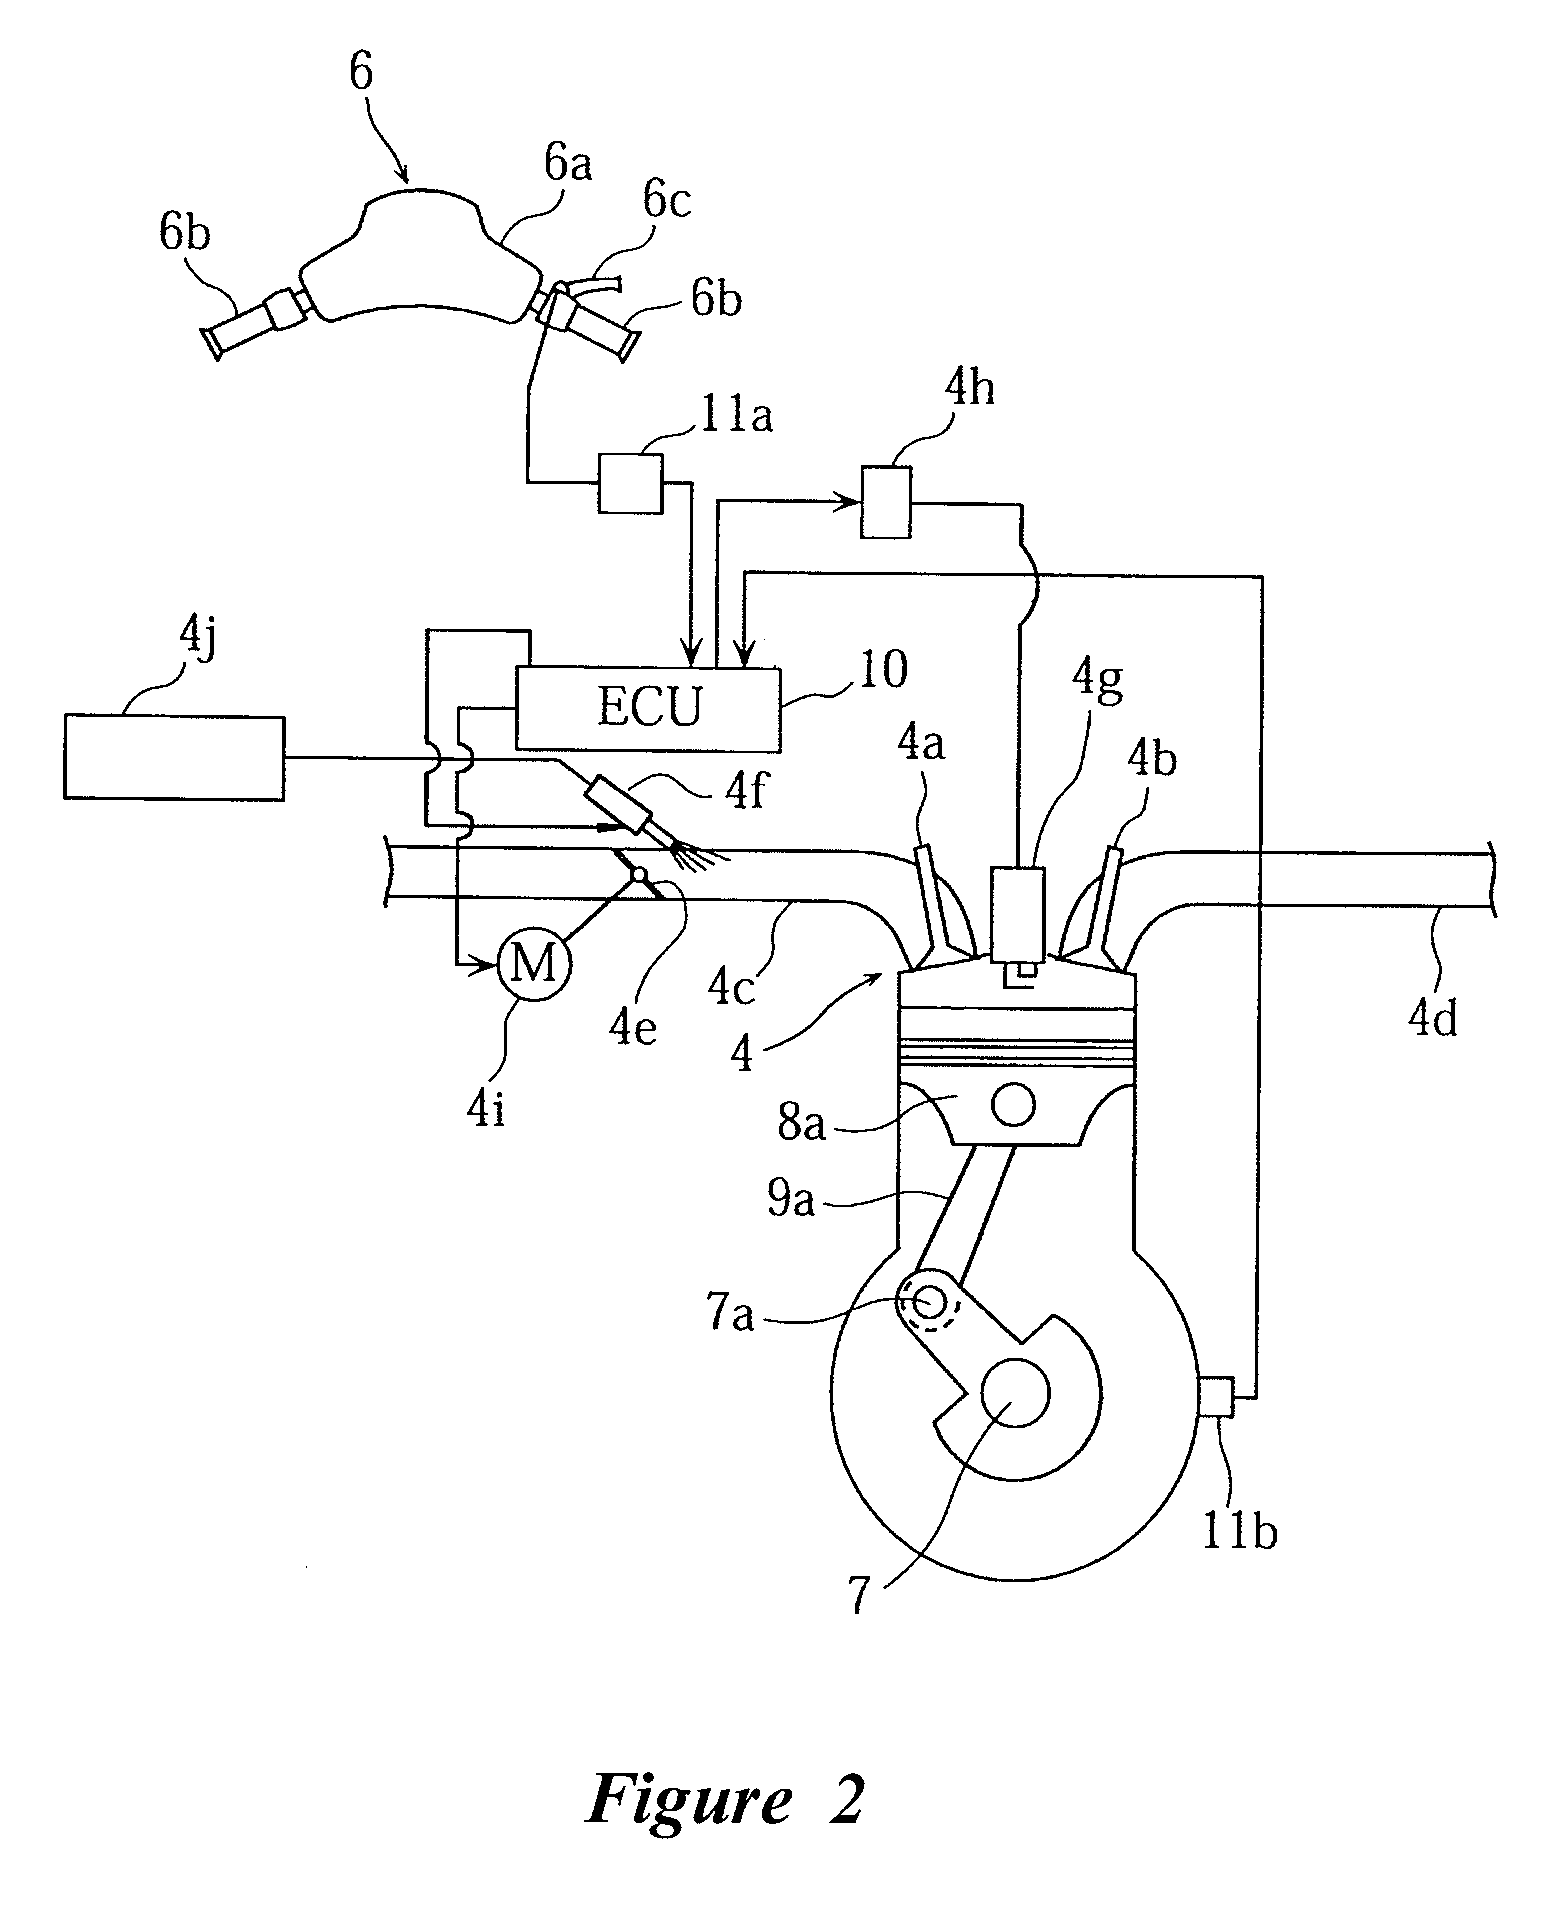 Multiple-Cylinder Engine for Planing Water Vehicle